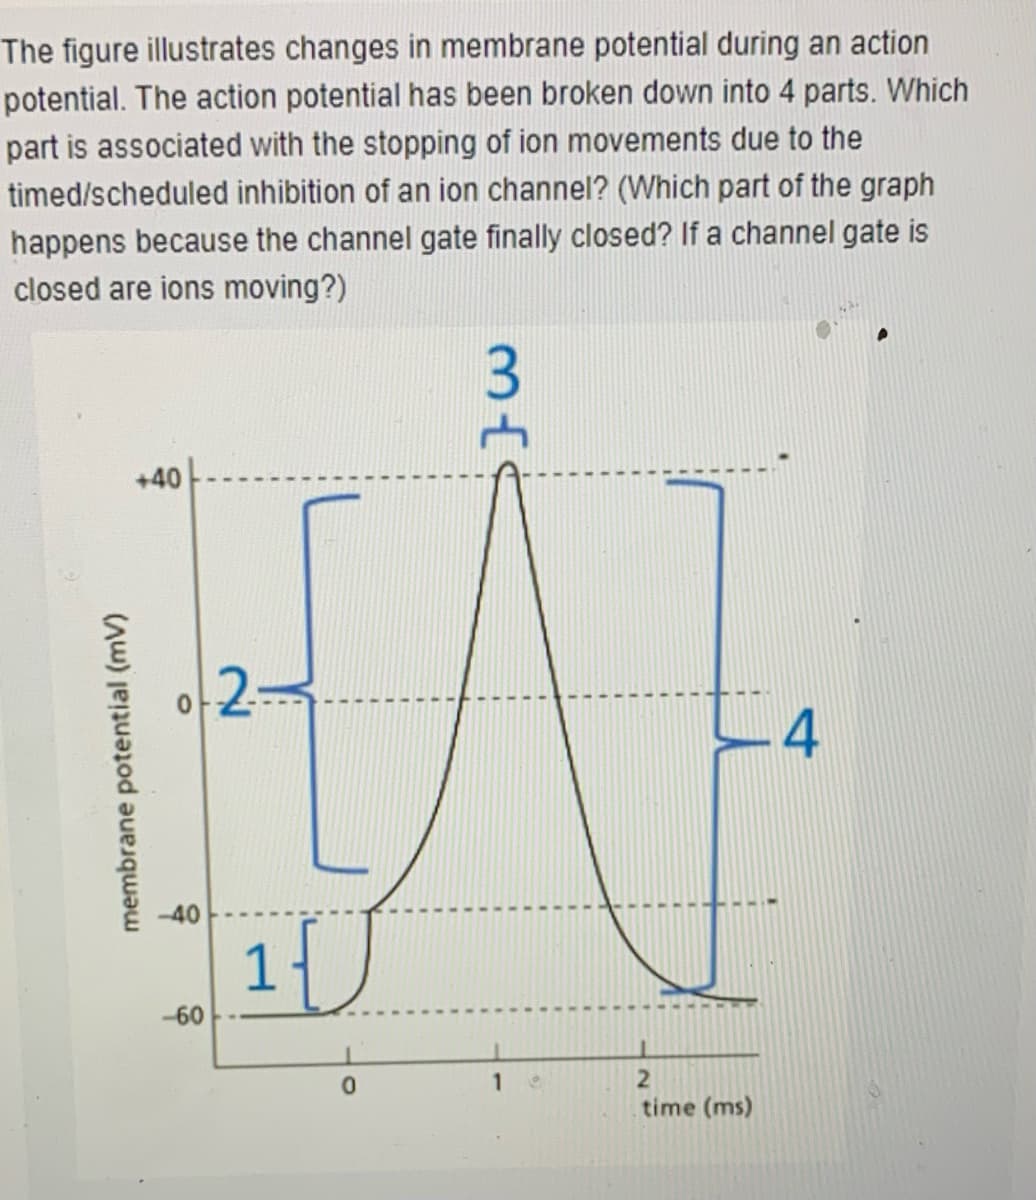 The figure illustrates changes in membrane potential during an action
potential. The action potential has been broken down into 4 parts. Which
part is associated with the stopping of ion movements due to the
timed/scheduled inhibition of an ion channel? (Which part of the graph
happens because the channel gate finally closed? If a channel gate is
closed are ions moving?)
3
+40
.4
-40
1
-60
21
time (ms)
membrane potential (mV)
